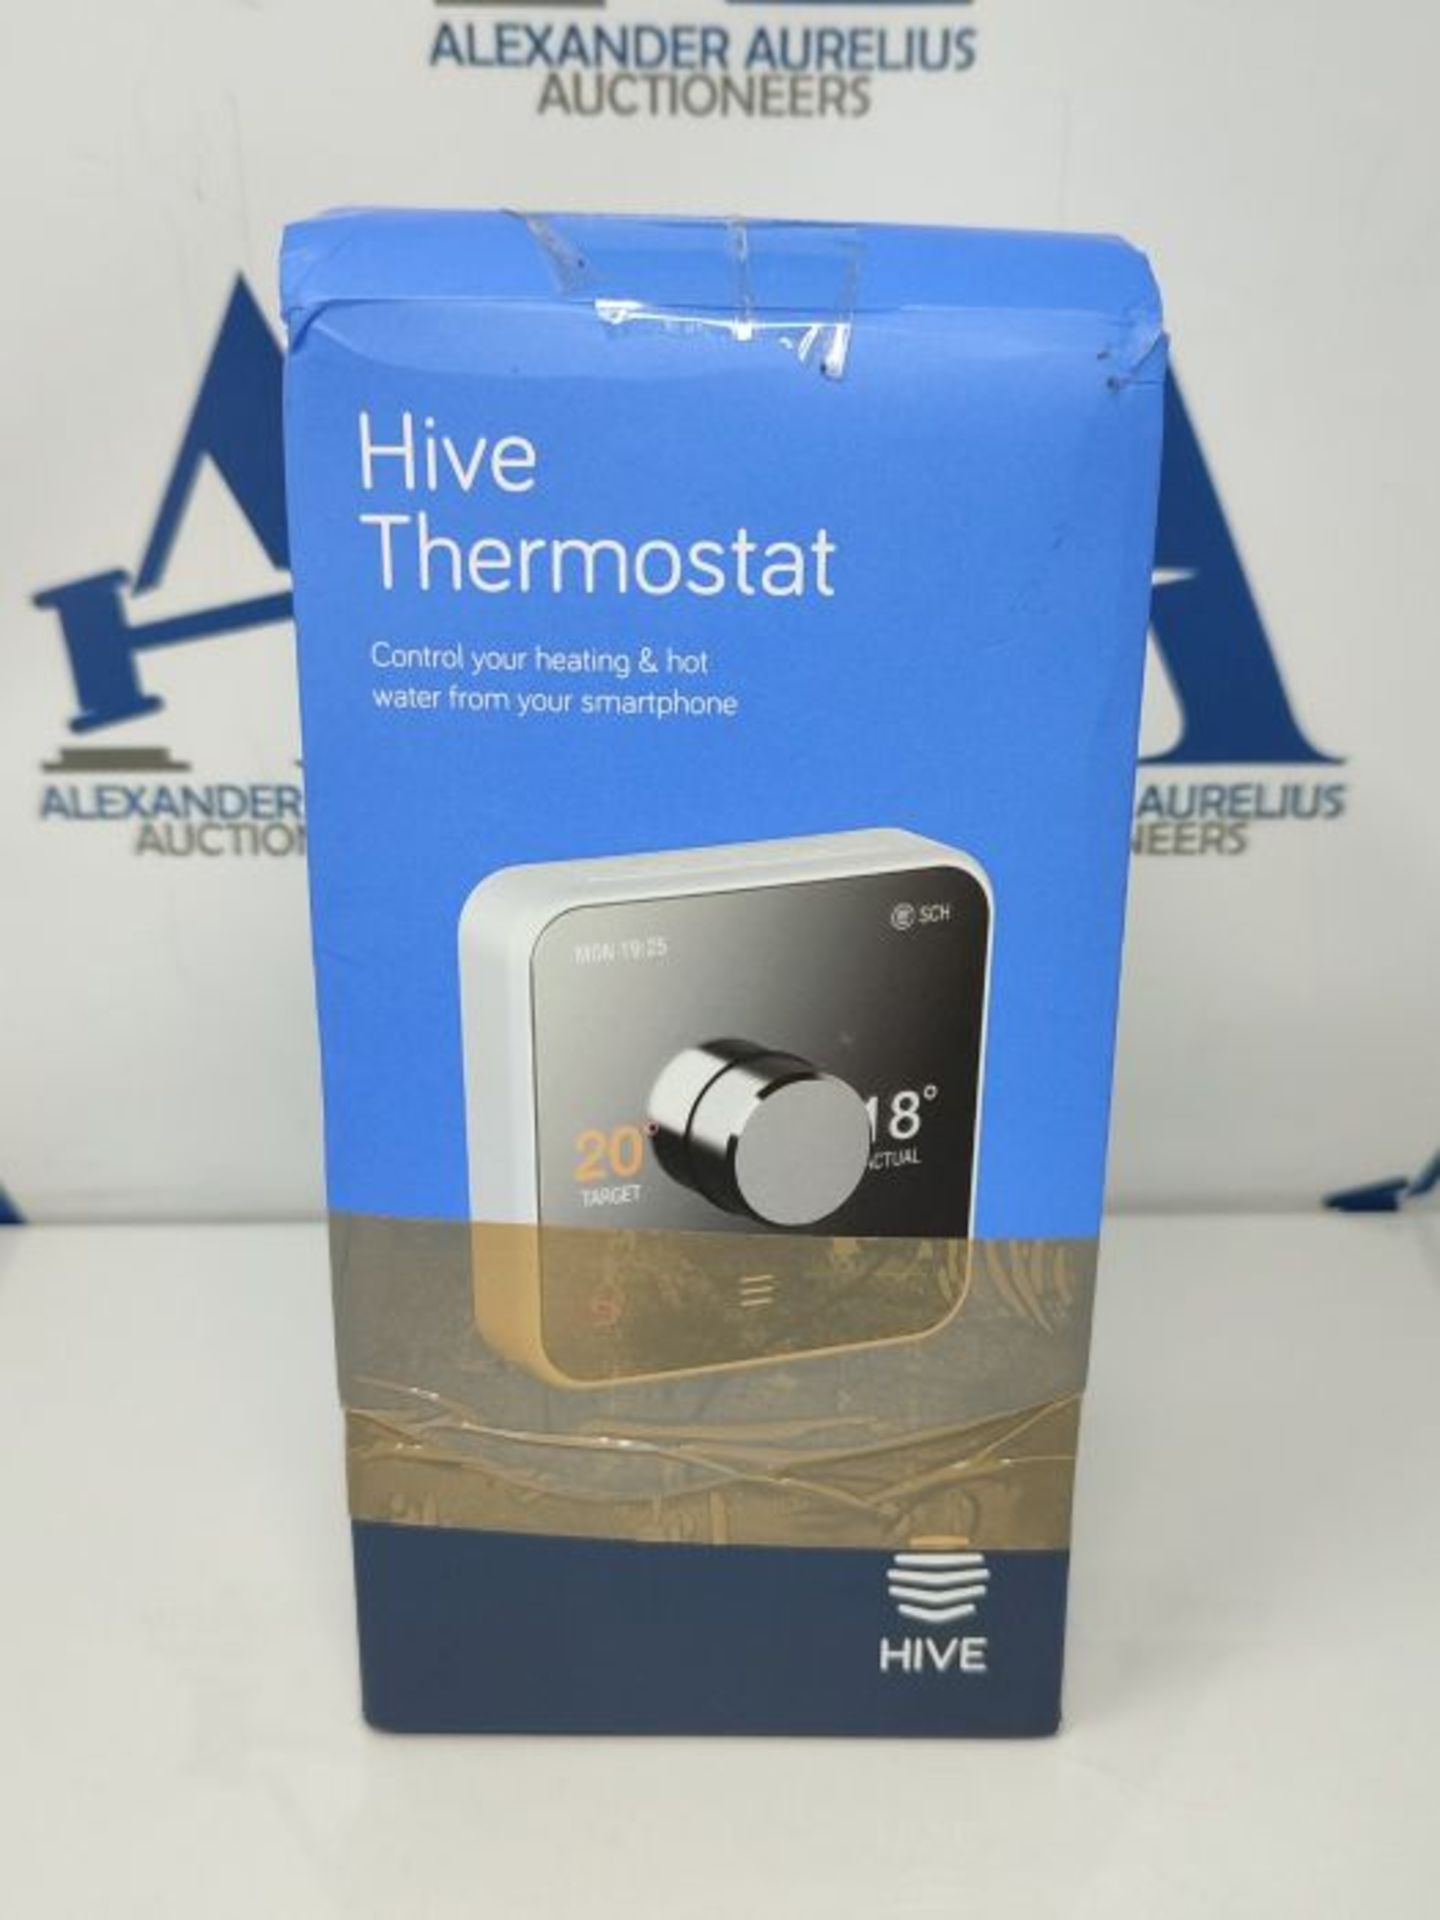 RRP £149.00 Hive Thermostat for Heating & Hot Water with Hive Hub - Energy Saving Thermostat - Image 5 of 6